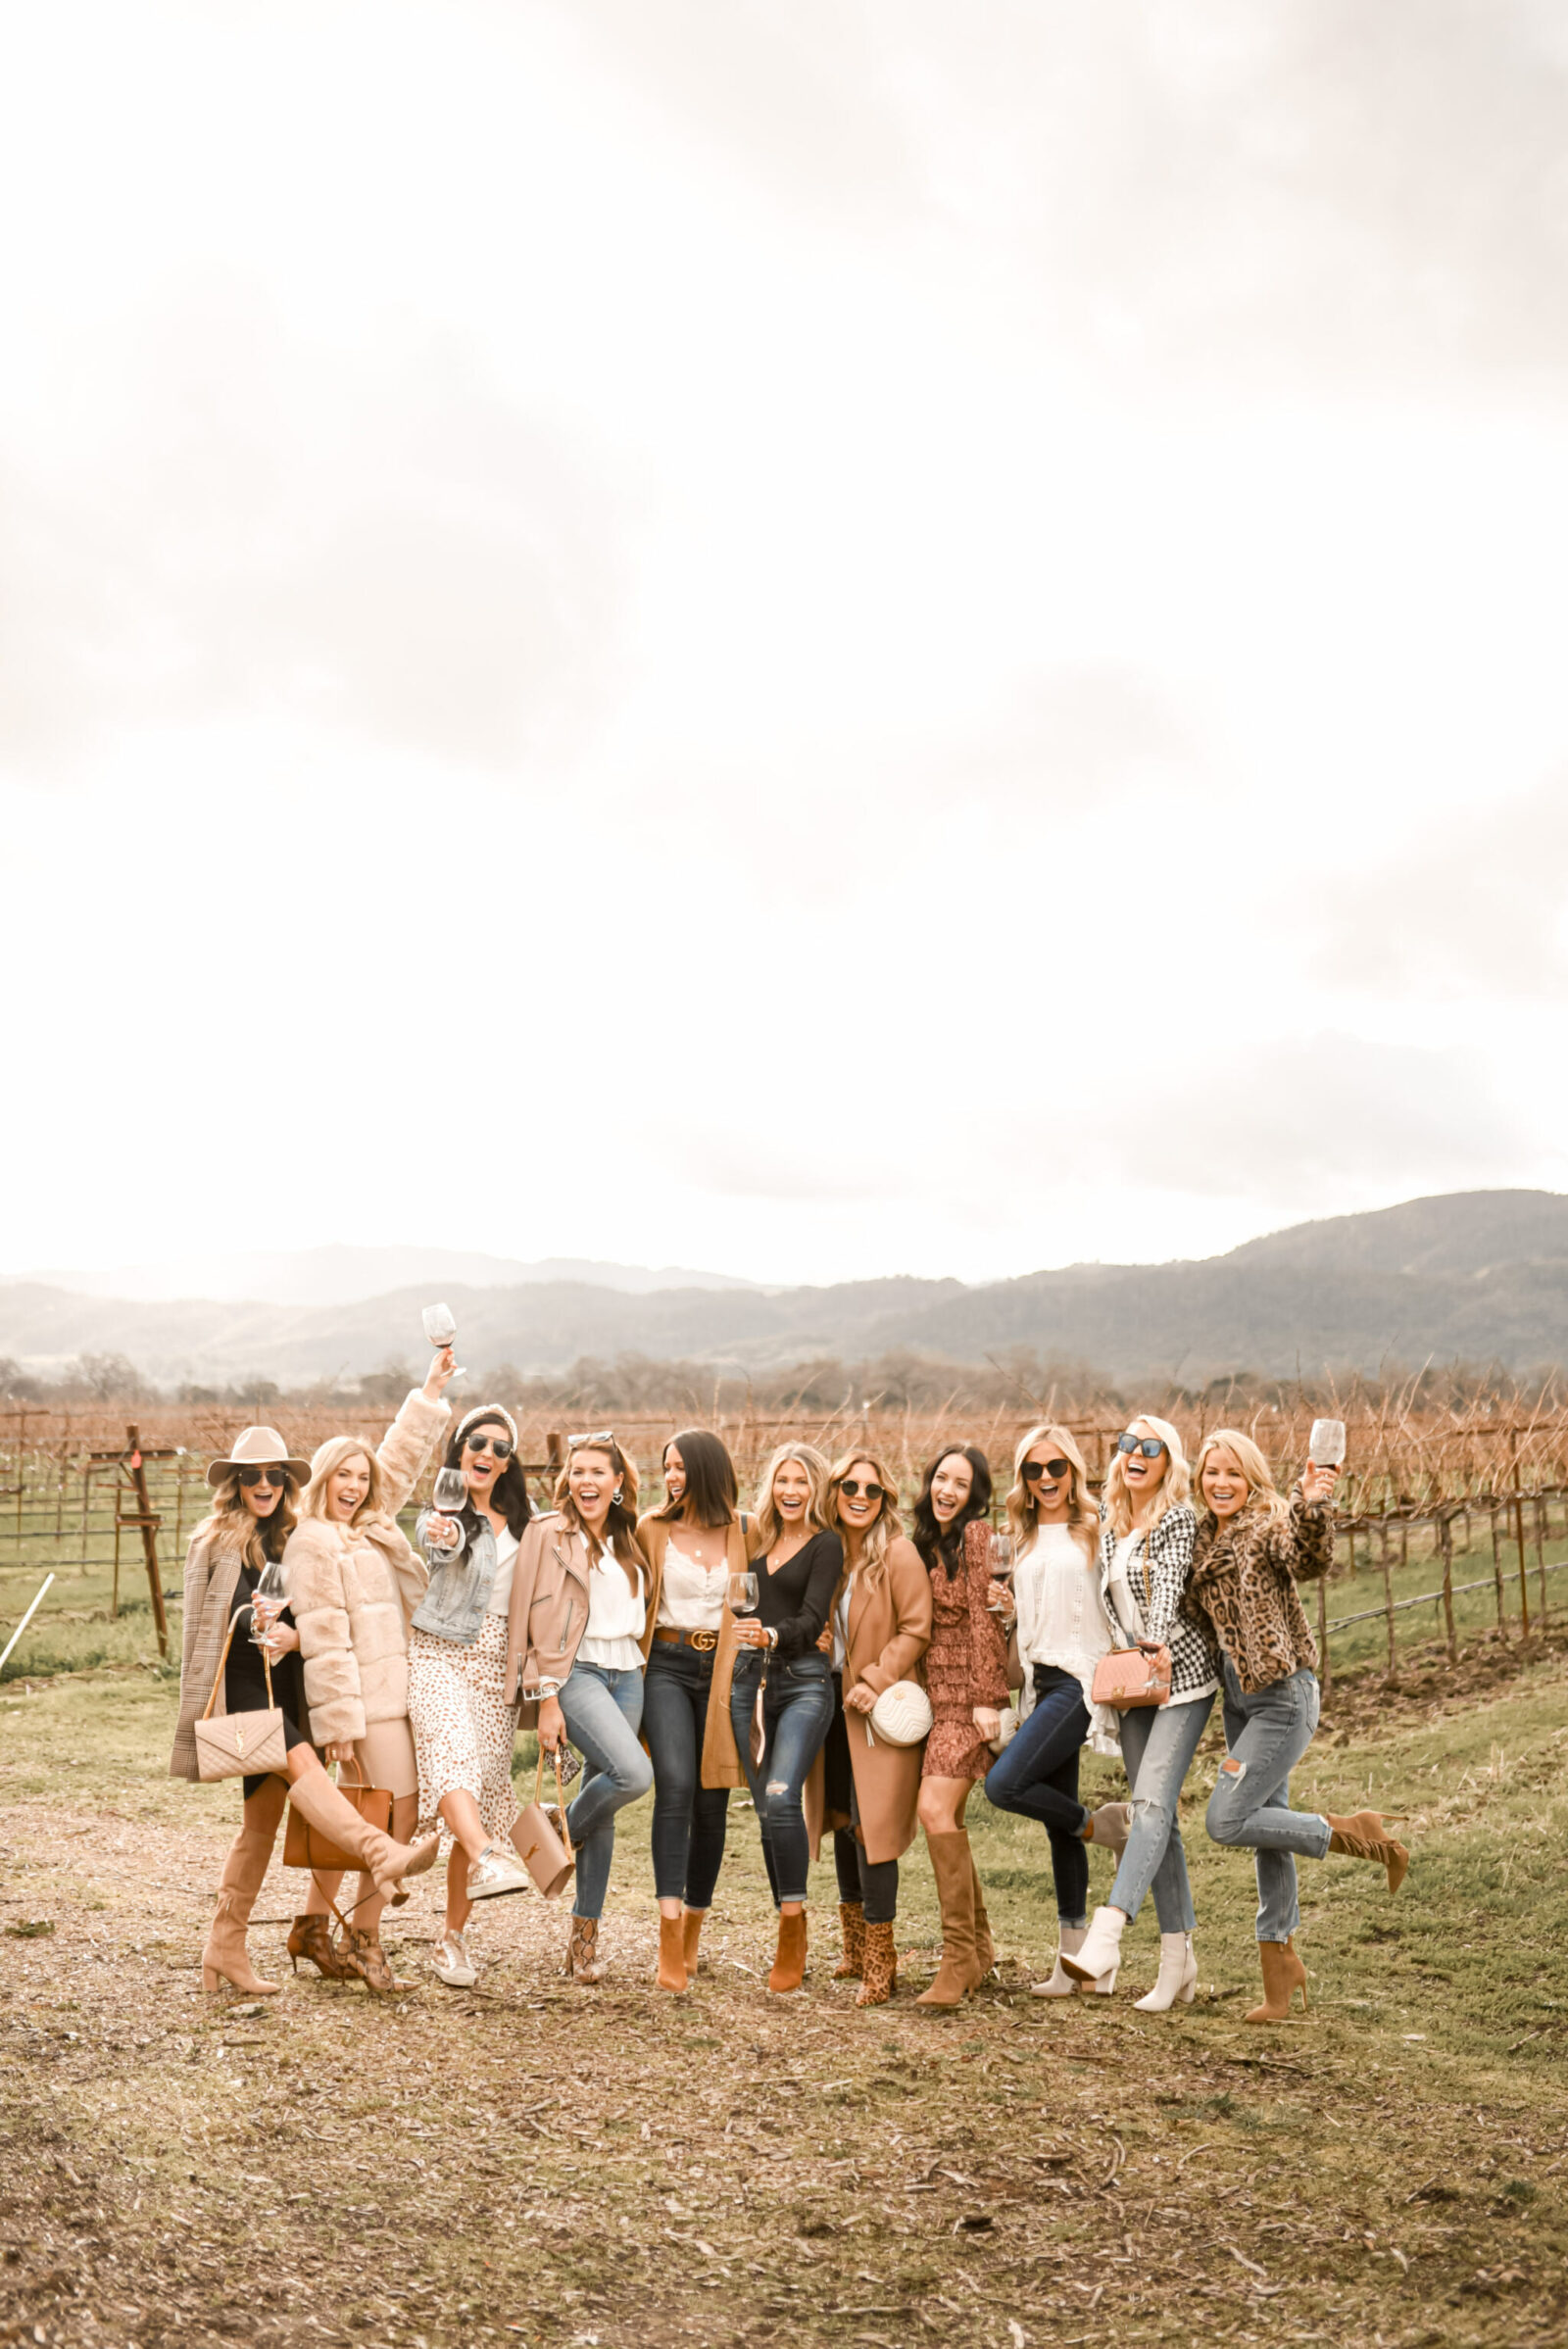 Bachelorette trip ideas your bridal party will die for